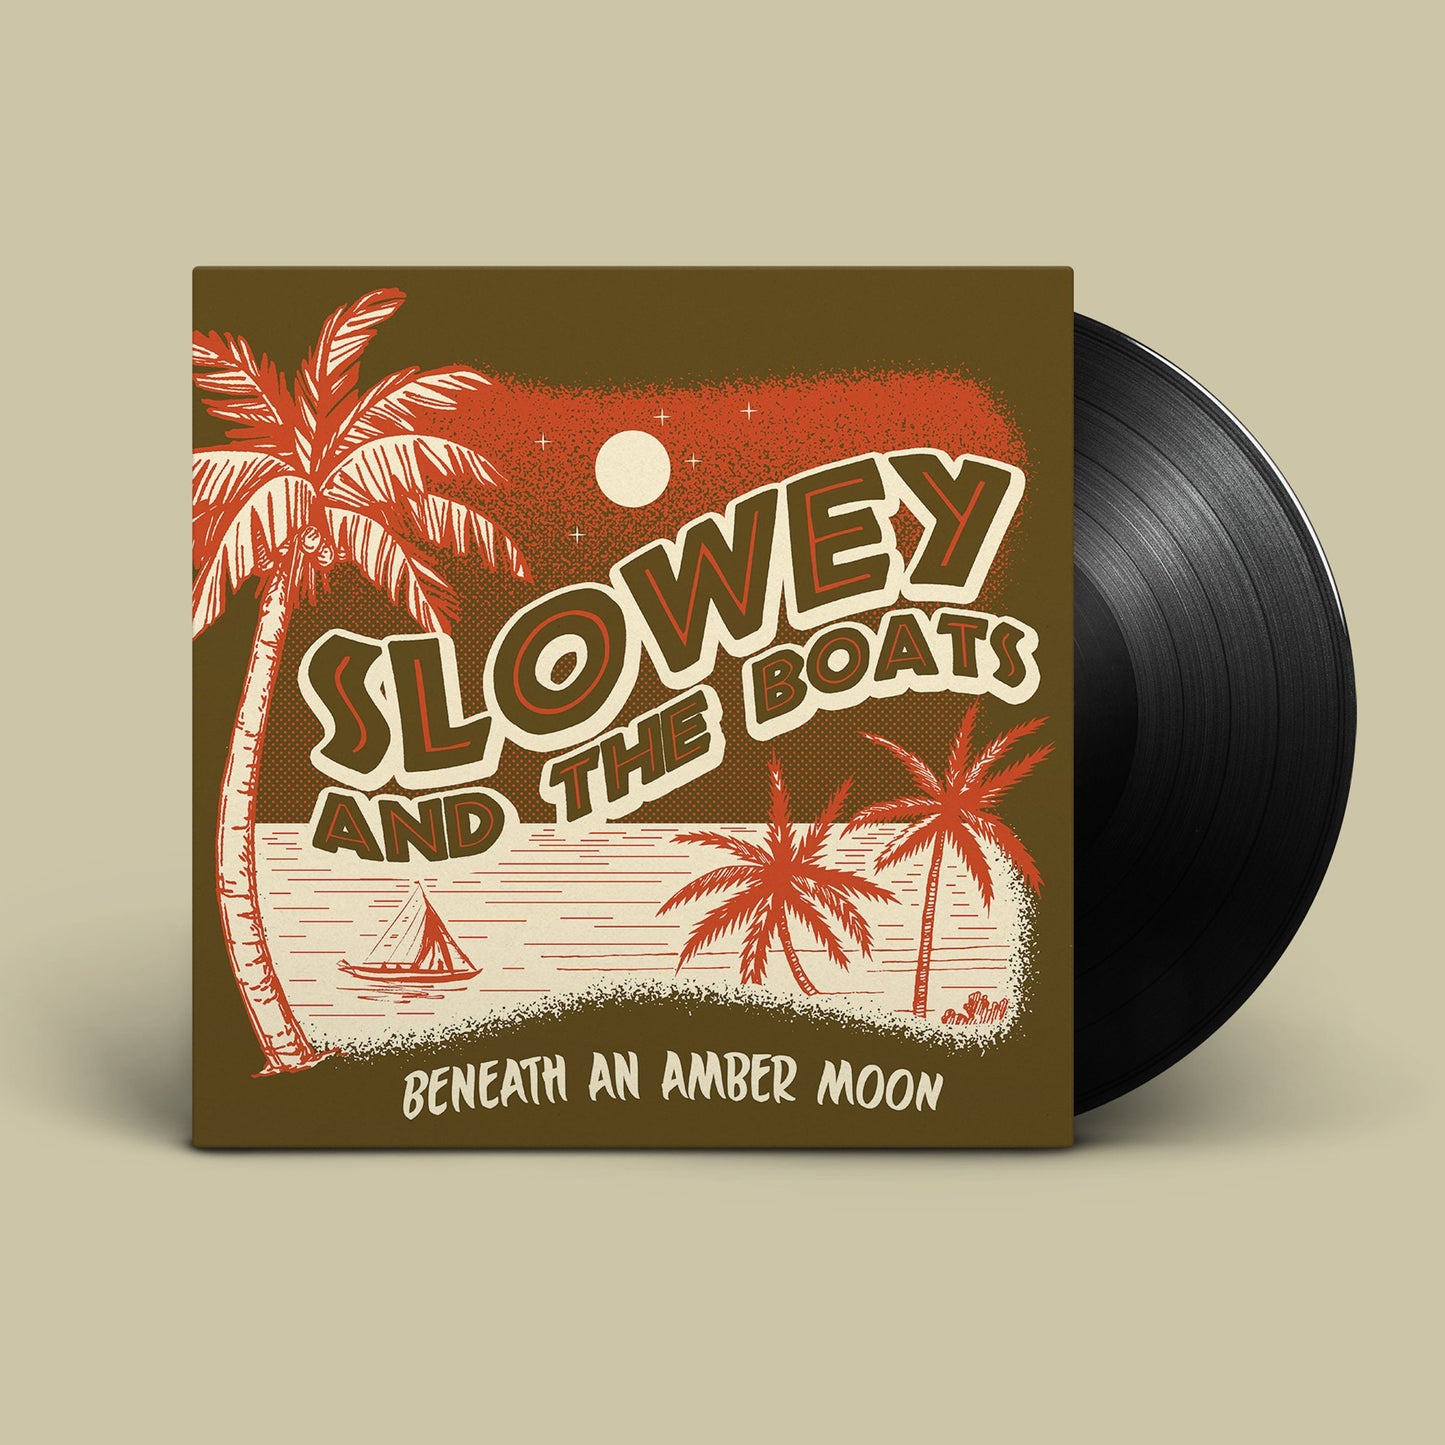 Slowey and The Boats "Beneath an Amber Moon" LP